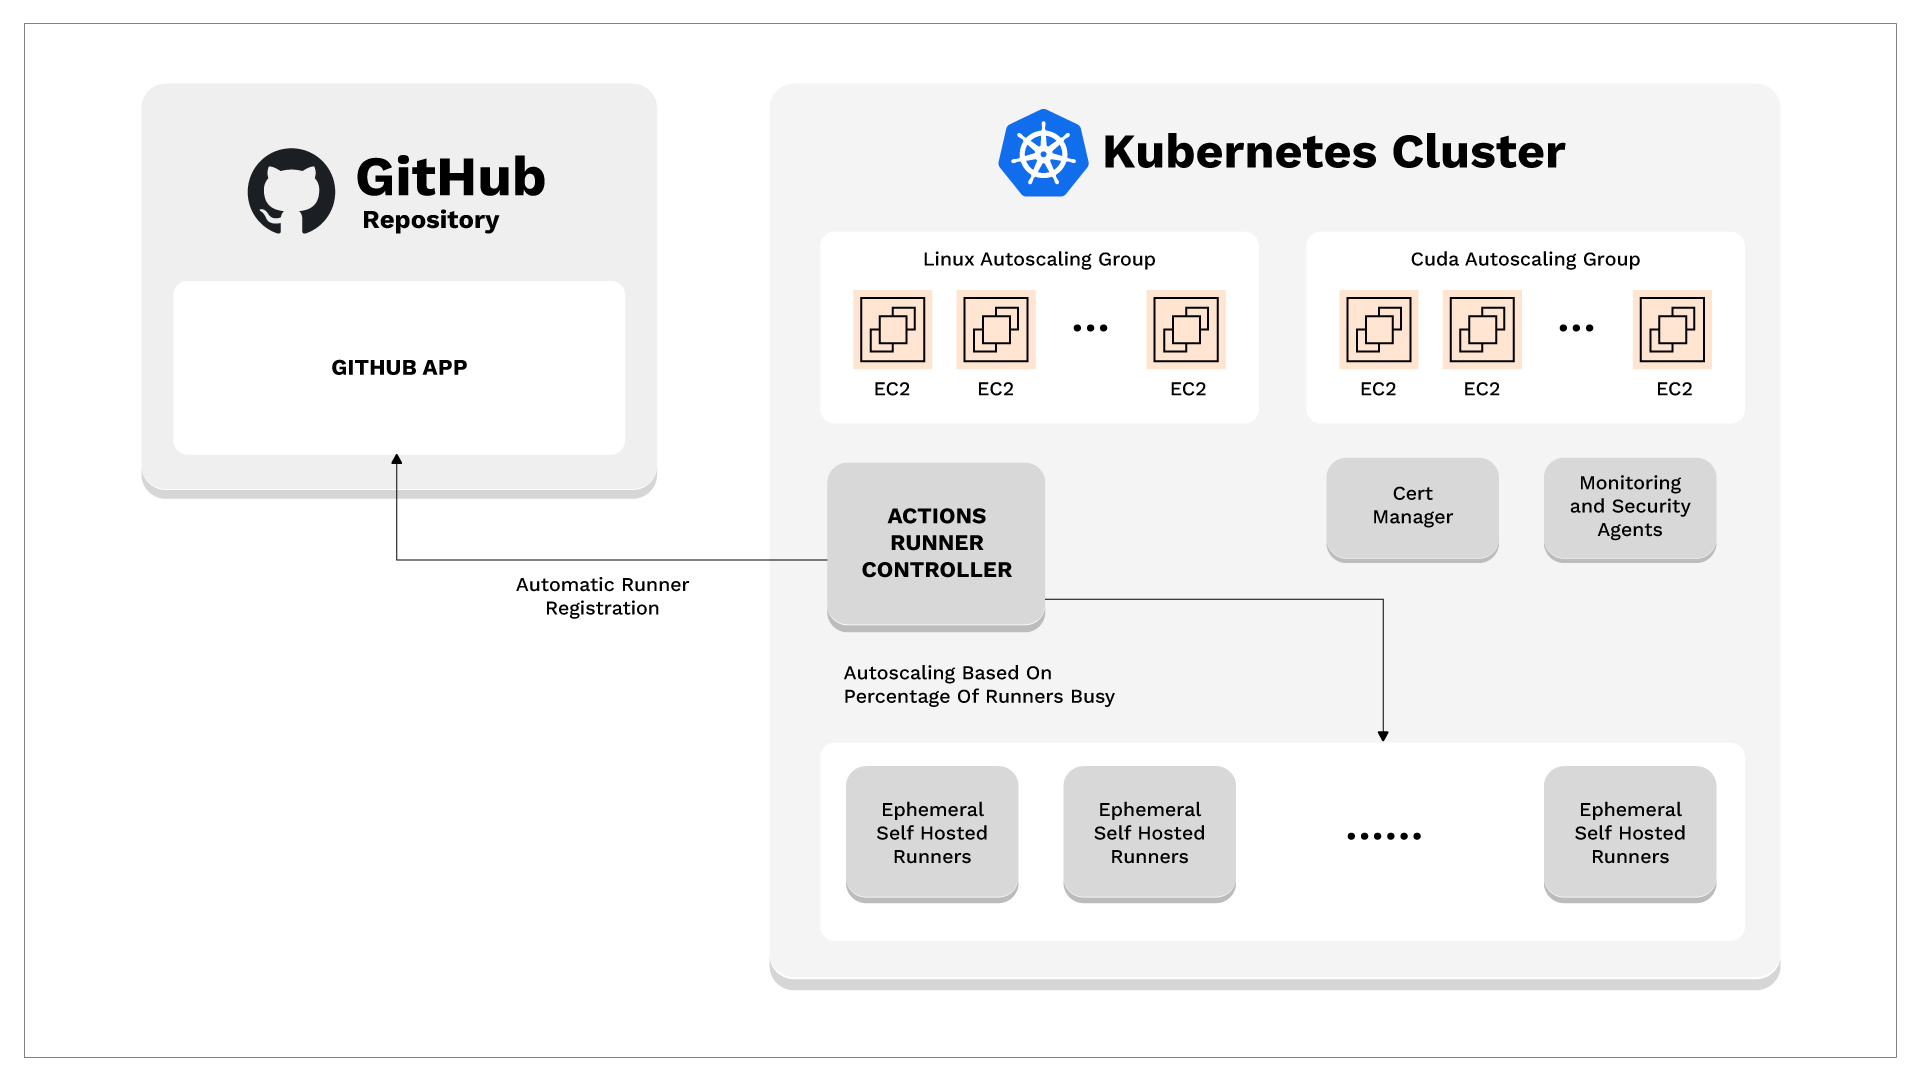 Graphic: Github repository - Kubernetes Cluster